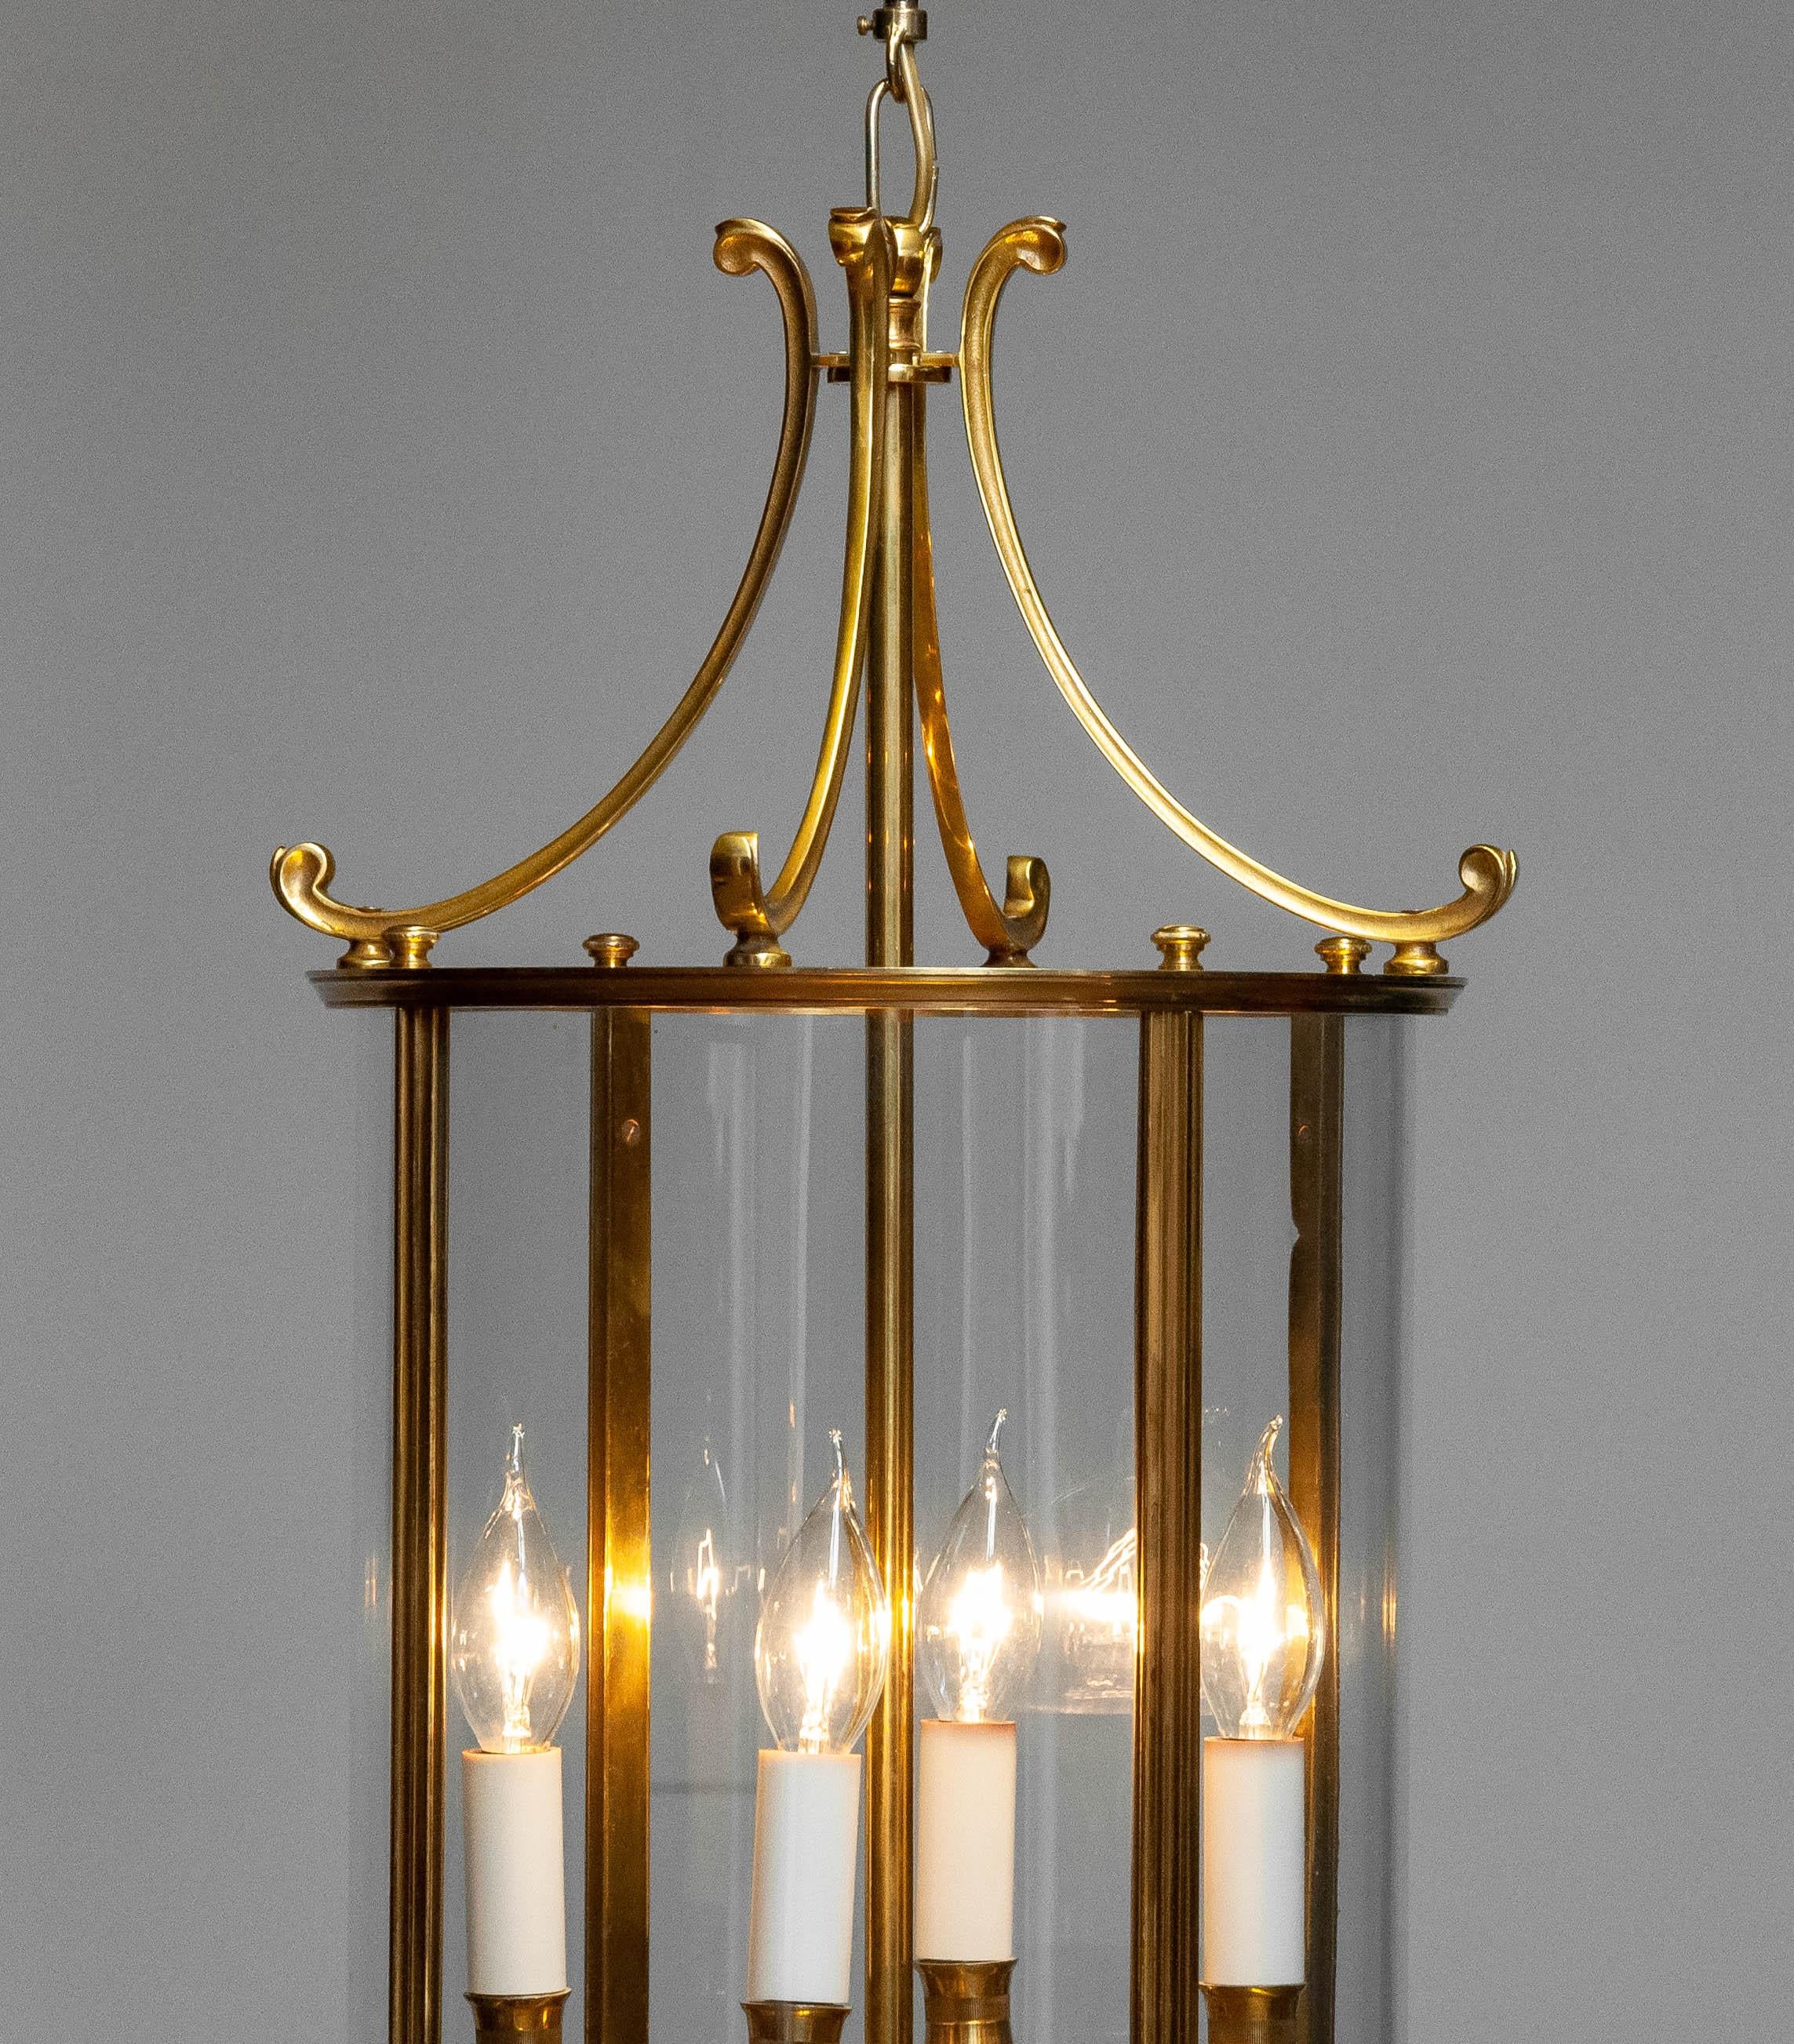 Elegant France Neoclassic Bronze Lantern with Curved Glass In Good Condition For Sale In Silvolde, Gelderland